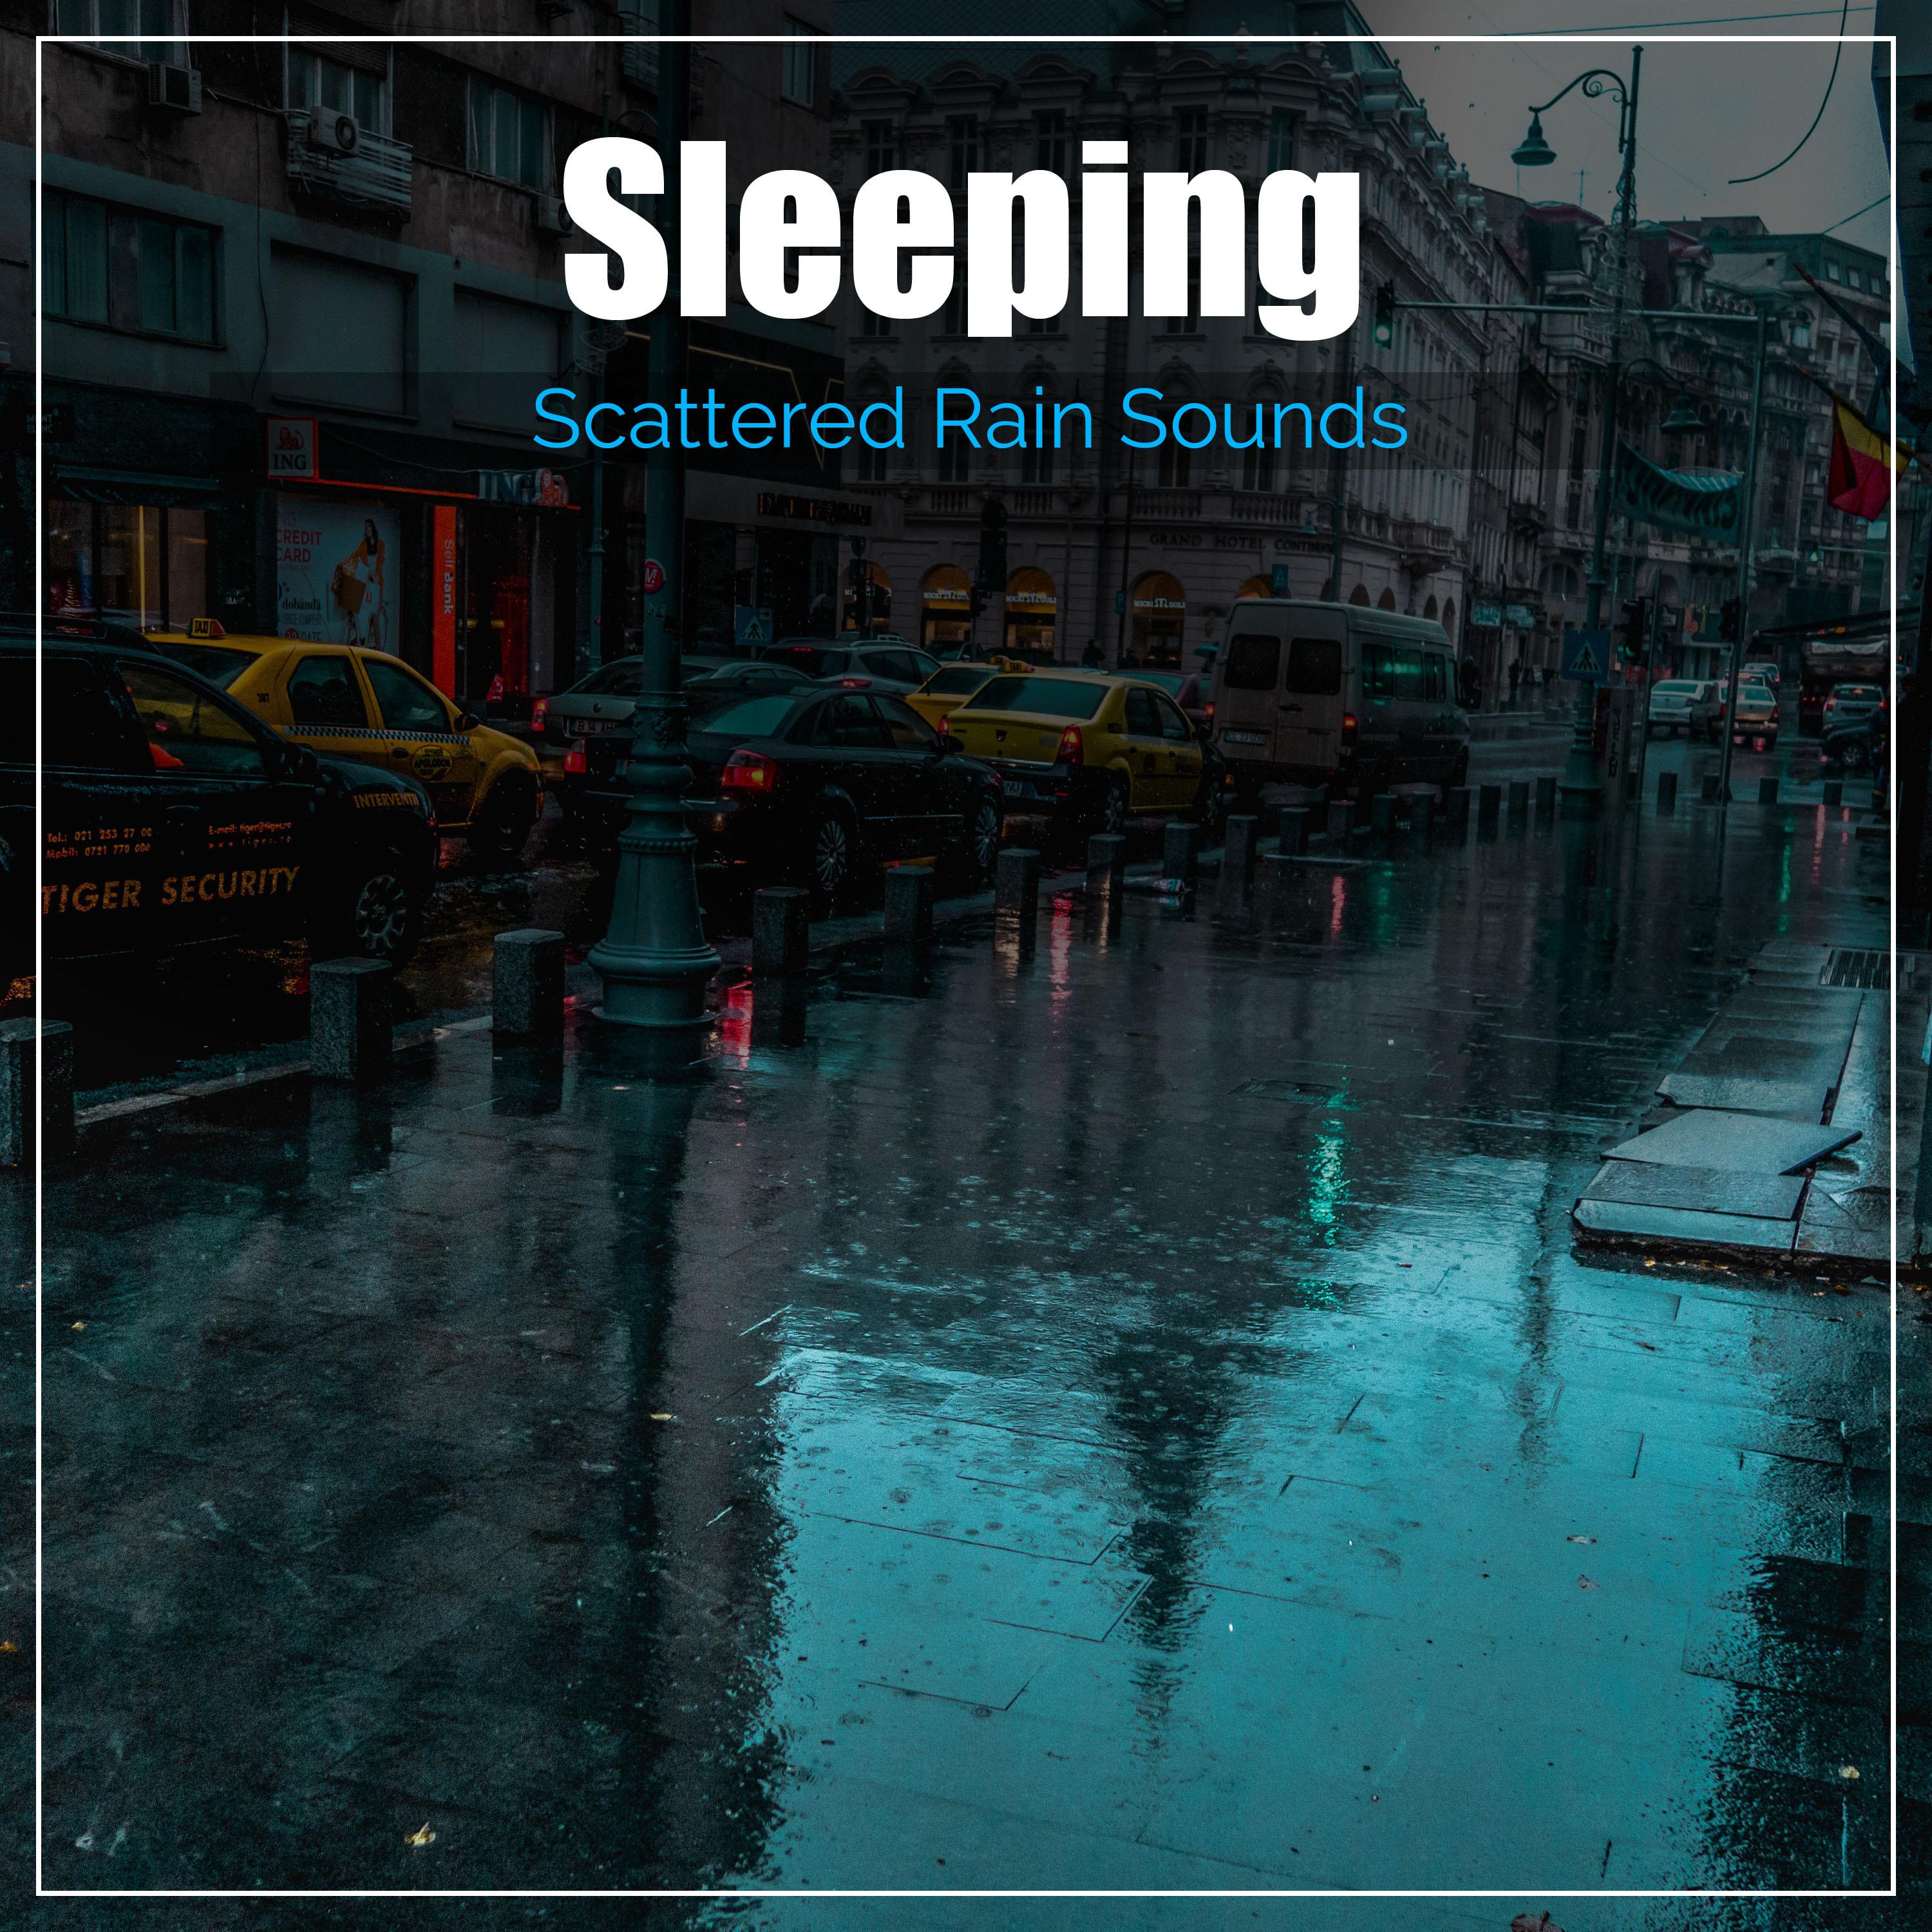 #21 Sleeping Scattered Rain Sounds